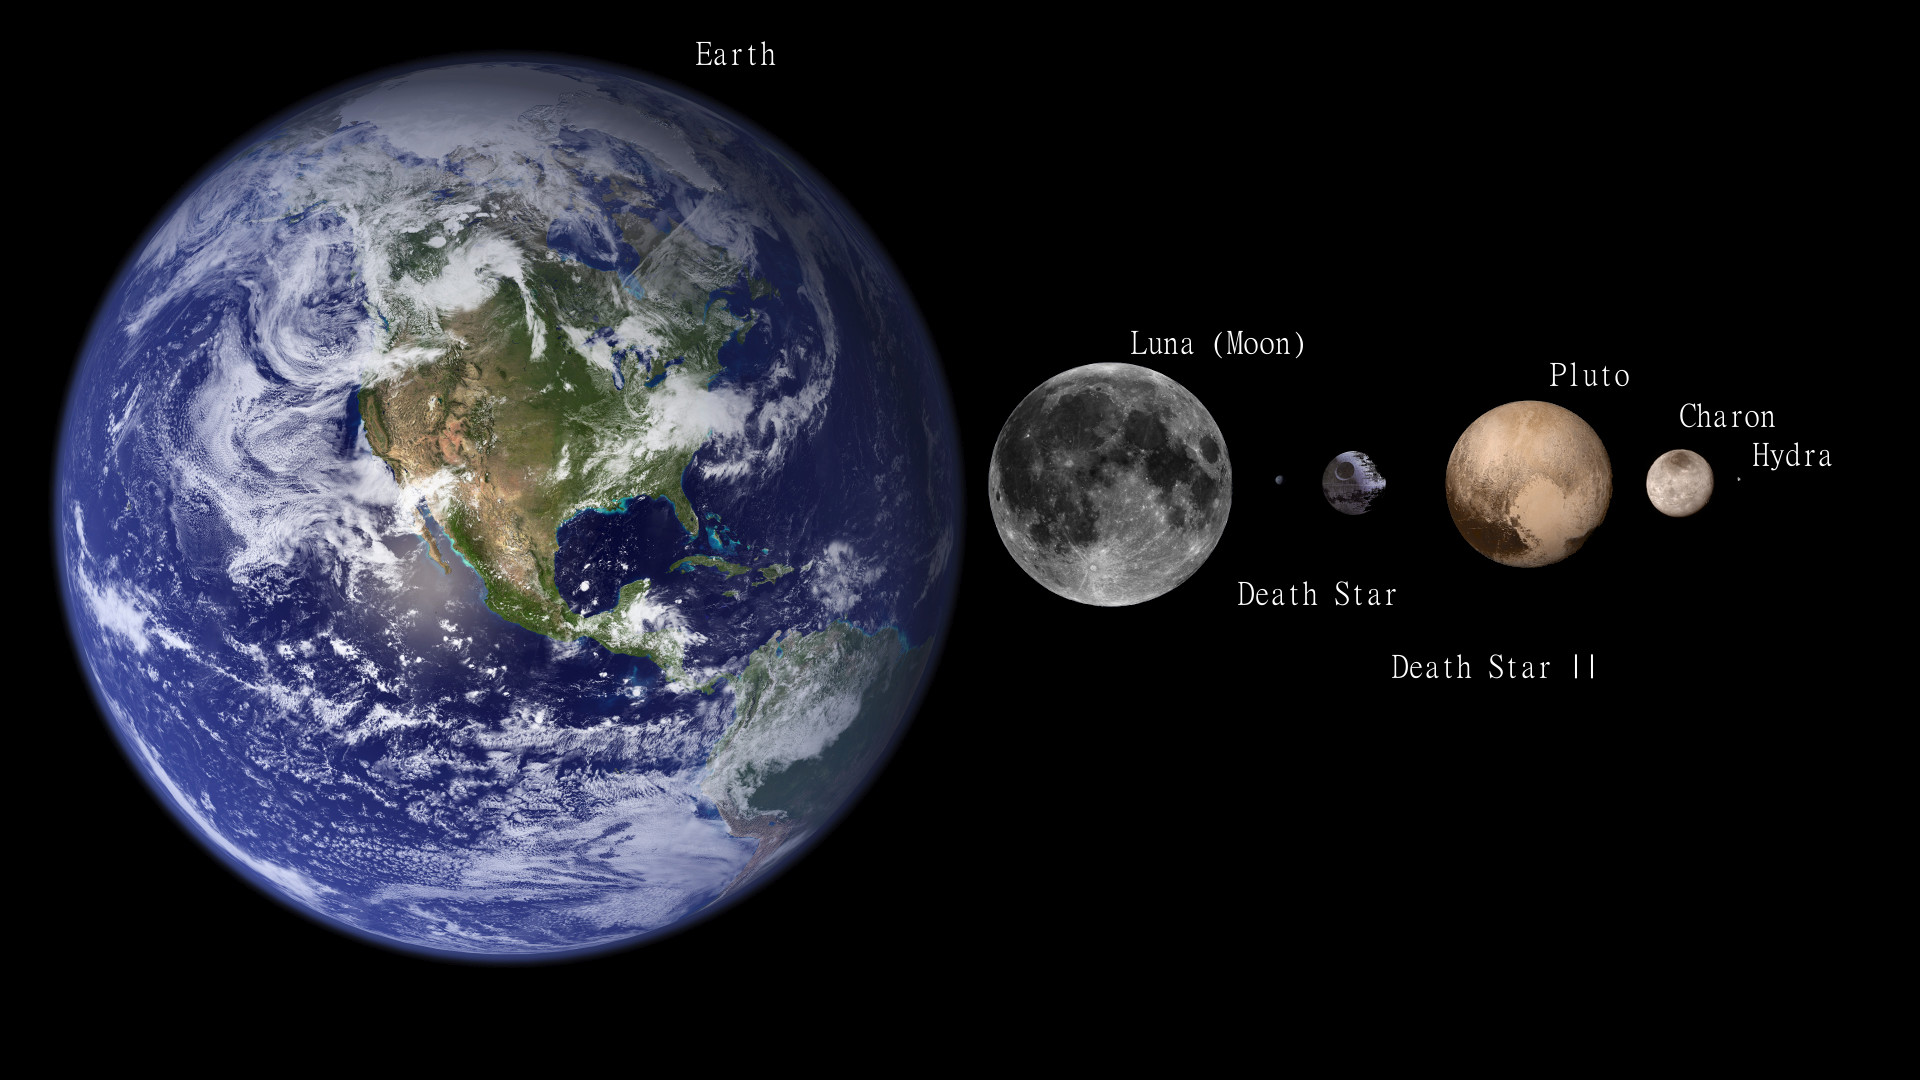 I had a little insomnia tonight, so I tossed together this comparison of the size of the two Death Stars as compared to The Earth, The Moon, Pluto,